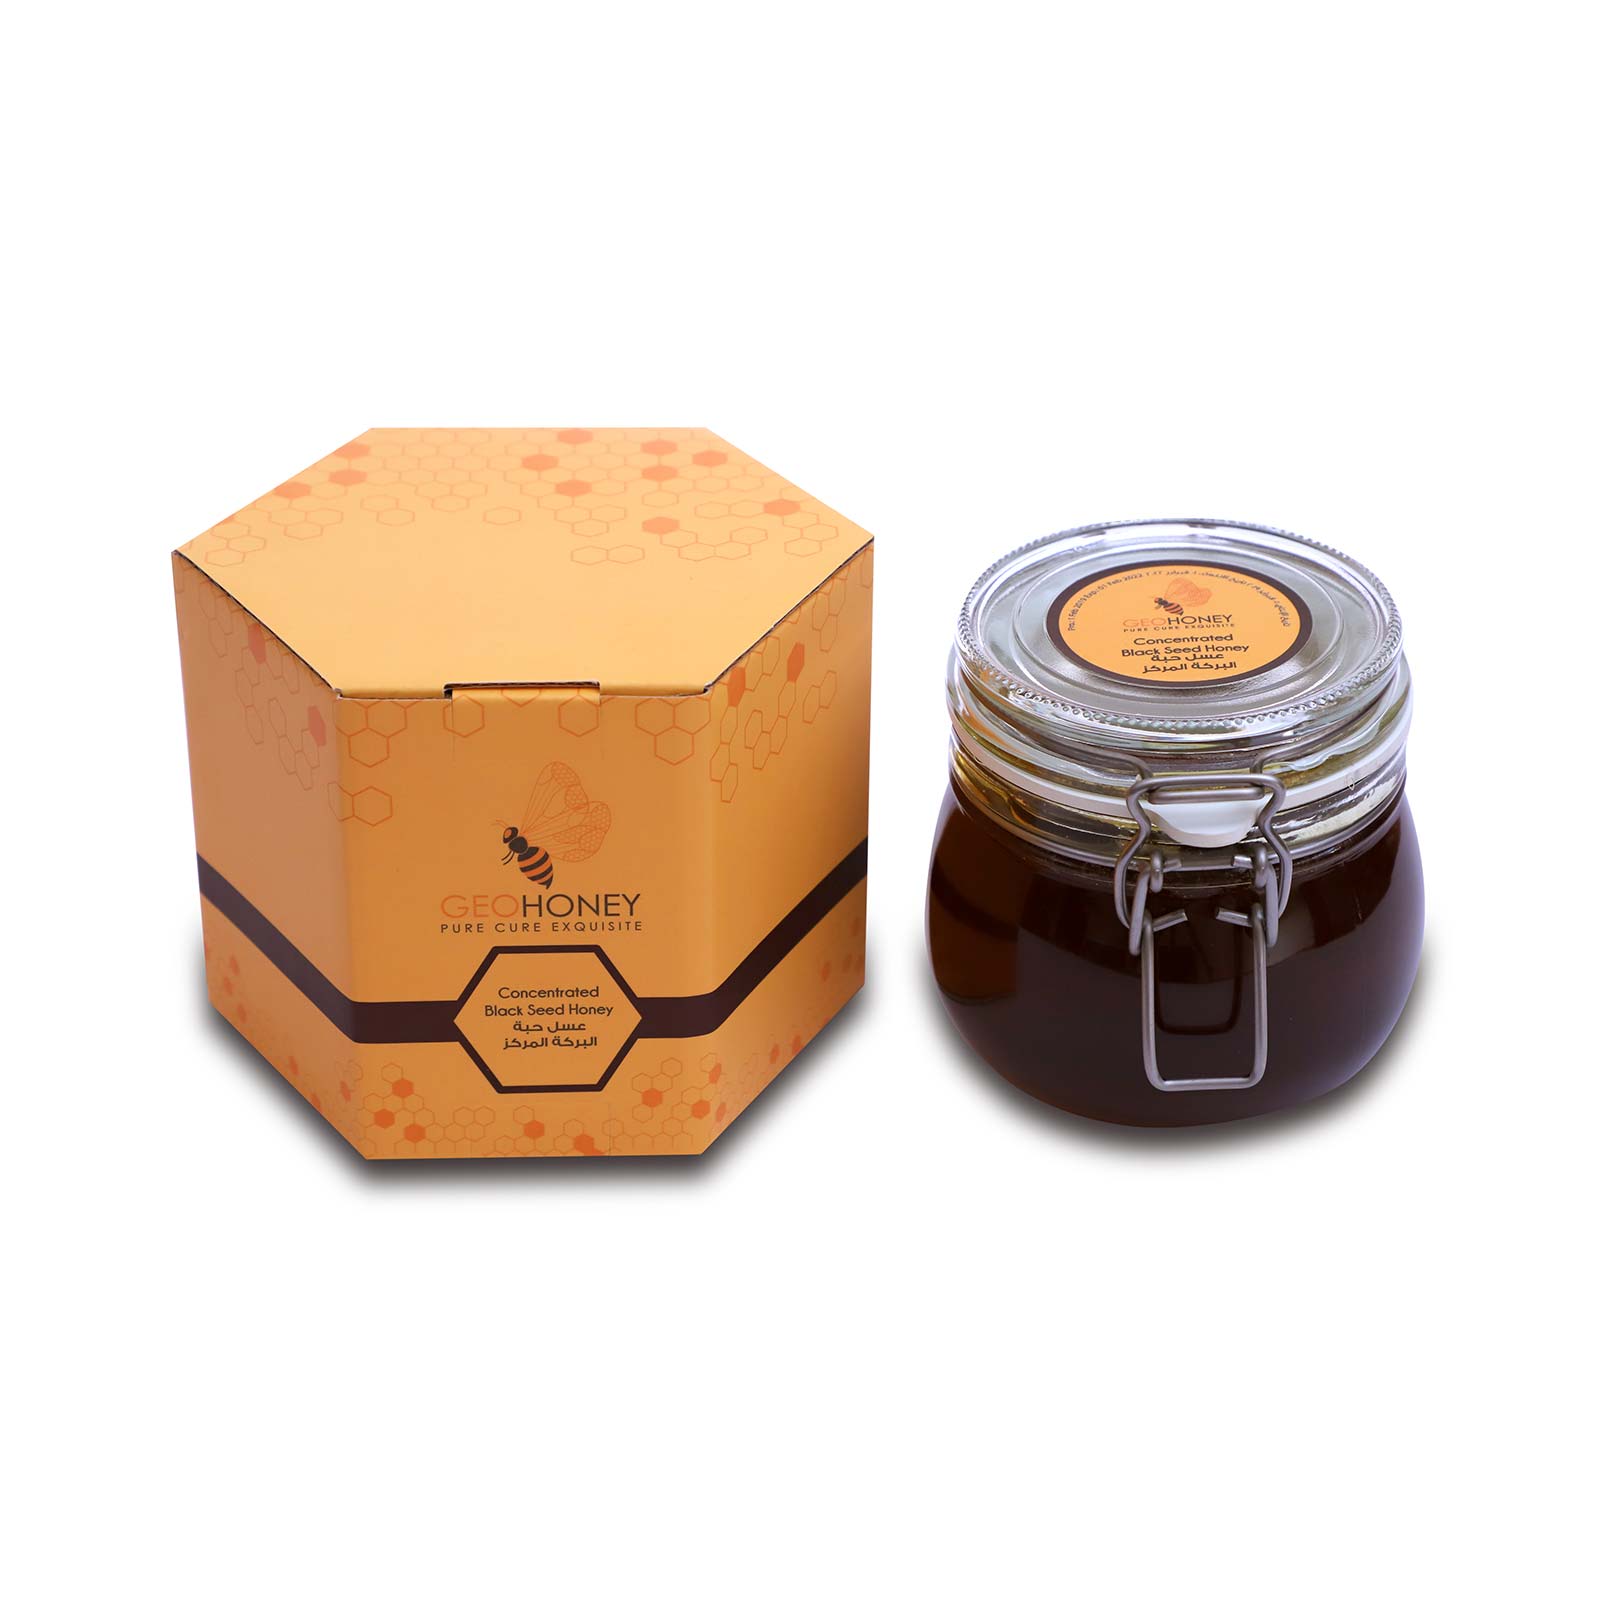 Black Seed Honey Concentrated 350g - GeoHoney.jpg  by geohoney